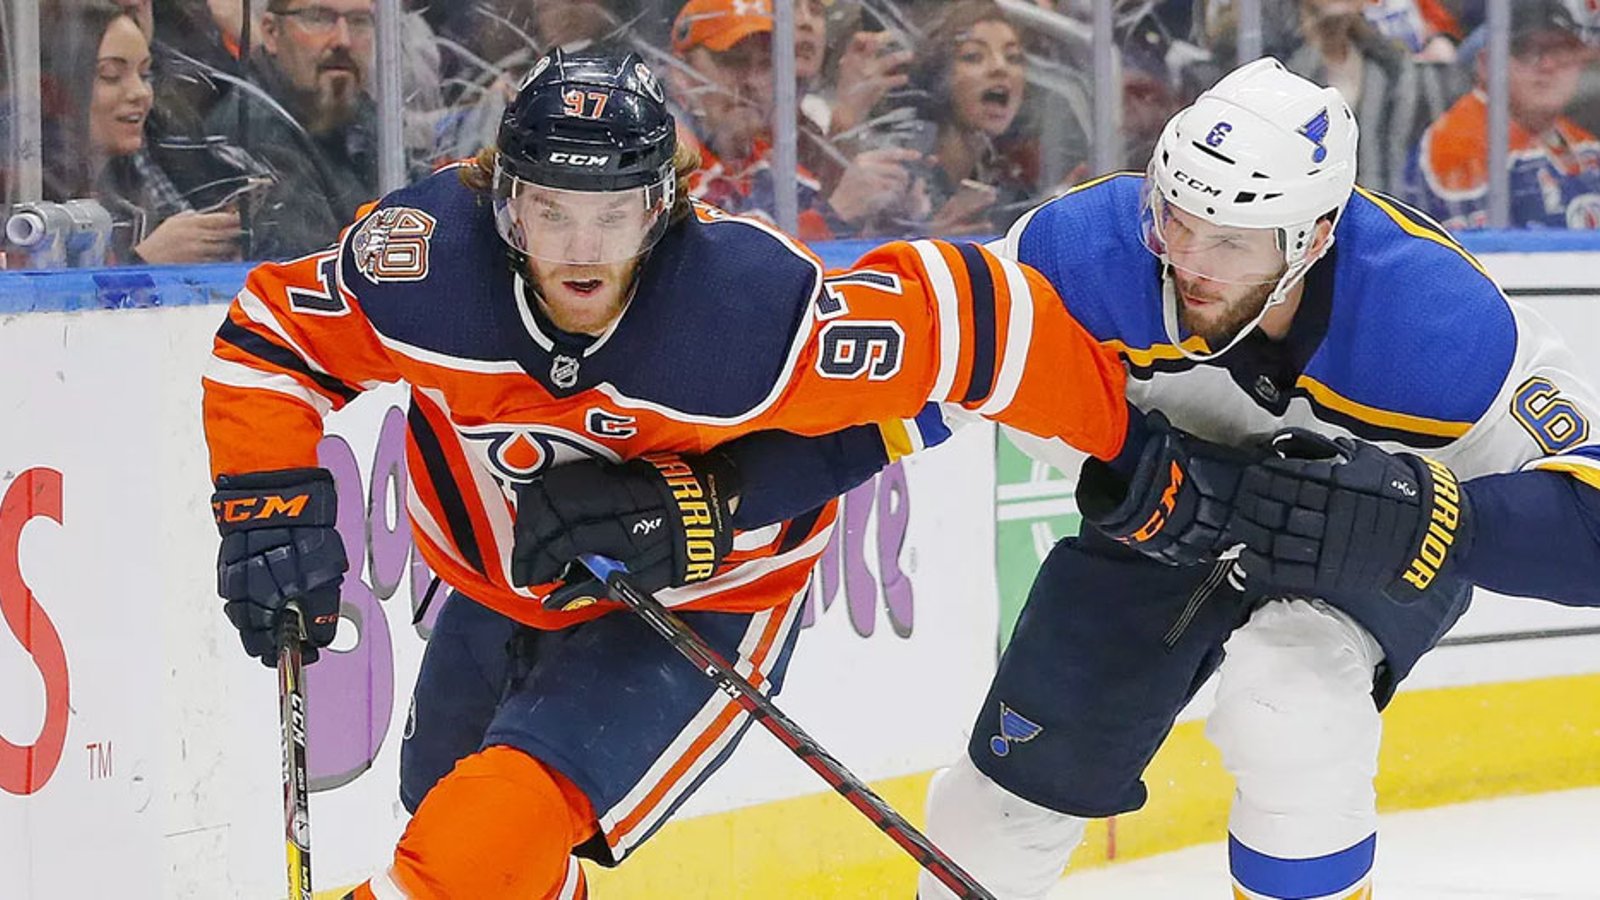 Oilers promote Gagner to top line as they host the Blues